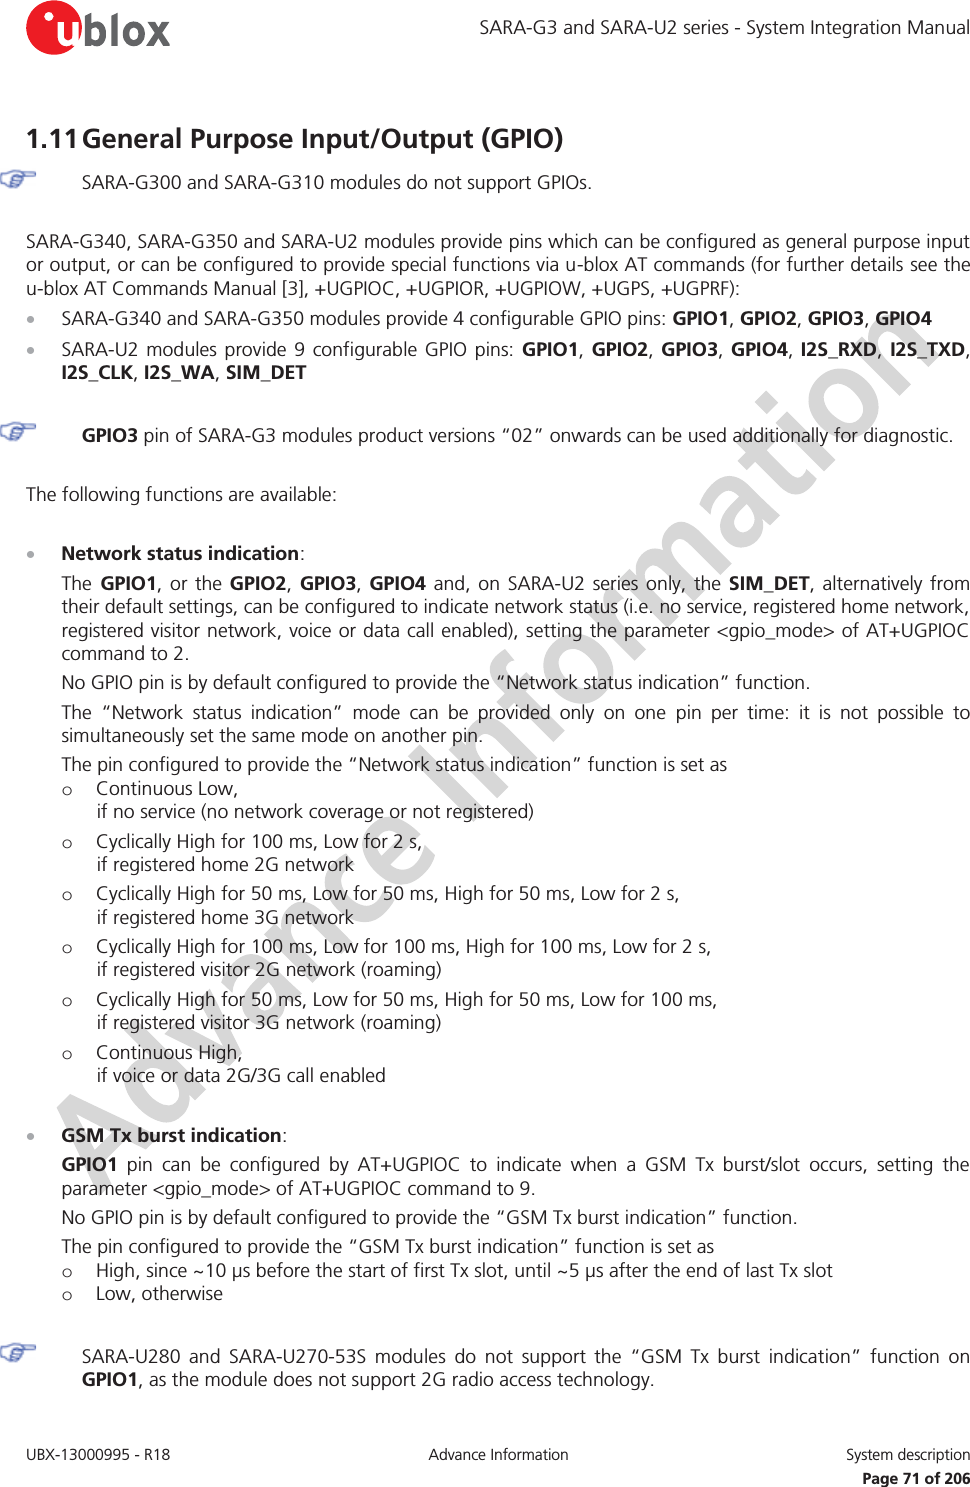 SARA-G3 and SARA-U2 series - System Integration Manual UBX-13000995 - R18  Advance Information  System description   Page 71 of 206 1.11 General Purpose Input/Output (GPIO)  SARA-G300 and SARA-G310 modules do not support GPIOs.  SARA-G340, SARA-G350 and SARA-U2 modules provide pins which can be configured as general purpose input or output, or can be configured to provide special functions via u-blox AT commands (for further details see the u-blox AT Commands Manual [3], +UGPIOC, +UGPIOR, +UGPIOW, +UGPS, +UGPRF): x SARA-G340 and SARA-G350 modules provide 4 configurable GPIO pins: GPIO1, GPIO2, GPIO3, GPIO4 x SARA-U2 modules provide 9 configurable GPIO pins: GPIO1,  GPIO2, GPIO3, GPIO4, I2S_RXD,  I2S_TXD, I2S_CLK, I2S_WA, SIM_DET   GPIO3 pin of SARA-G3 modules product versions “02” onwards can be used additionally for diagnostic.  The following functions are available:  x Network status indication: The GPIO1, or the GPIO2, GPIO3,  GPIO4 and, on SARA-U2 series only, the SIM_DET, alternatively from their default settings, can be configured to indicate network status (i.e. no service, registered home network, registered visitor network, voice or data call enabled), setting the parameter &lt;gpio_mode&gt; of AT+UGPIOC command to 2. No GPIO pin is by default configured to provide the “Network status indication” function. The “Network status indication” mode can be provided only on one pin per time: it is not possible to simultaneously set the same mode on another pin. The pin configured to provide the “Network status indication” function is set as o Continuous Low, if no service (no network coverage or not registered) o Cyclically High for 100 ms, Low for 2 s, if registered home 2G network o Cyclically High for 50 ms, Low for 50 ms, High for 50 ms, Low for 2 s, if registered home 3G network o Cyclically High for 100 ms, Low for 100 ms, High for 100 ms, Low for 2 s, if registered visitor 2G network (roaming) o Cyclically High for 50 ms, Low for 50 ms, High for 50 ms, Low for 100 ms, if registered visitor 3G network (roaming) o Continuous High, if voice or data 2G/3G call enabled  x GSM Tx burst indication: GPIO1 pin can be configured by AT+UGPIOC to indicate when a GSM Tx burst/slot occurs, setting the parameter &lt;gpio_mode&gt; of AT+UGPIOC command to 9. No GPIO pin is by default configured to provide the “GSM Tx burst indication” function. The pin configured to provide the “GSM Tx burst indication” function is set as o High, since ~10 μs before the start of first Tx slot, until ~5 μs after the end of last Tx slot o Low, otherwise   SARA-U280 and SARA-U270-53S modules do not support the “GSM Tx burst indication” function on GPIO1, as the module does not support 2G radio access technology. 